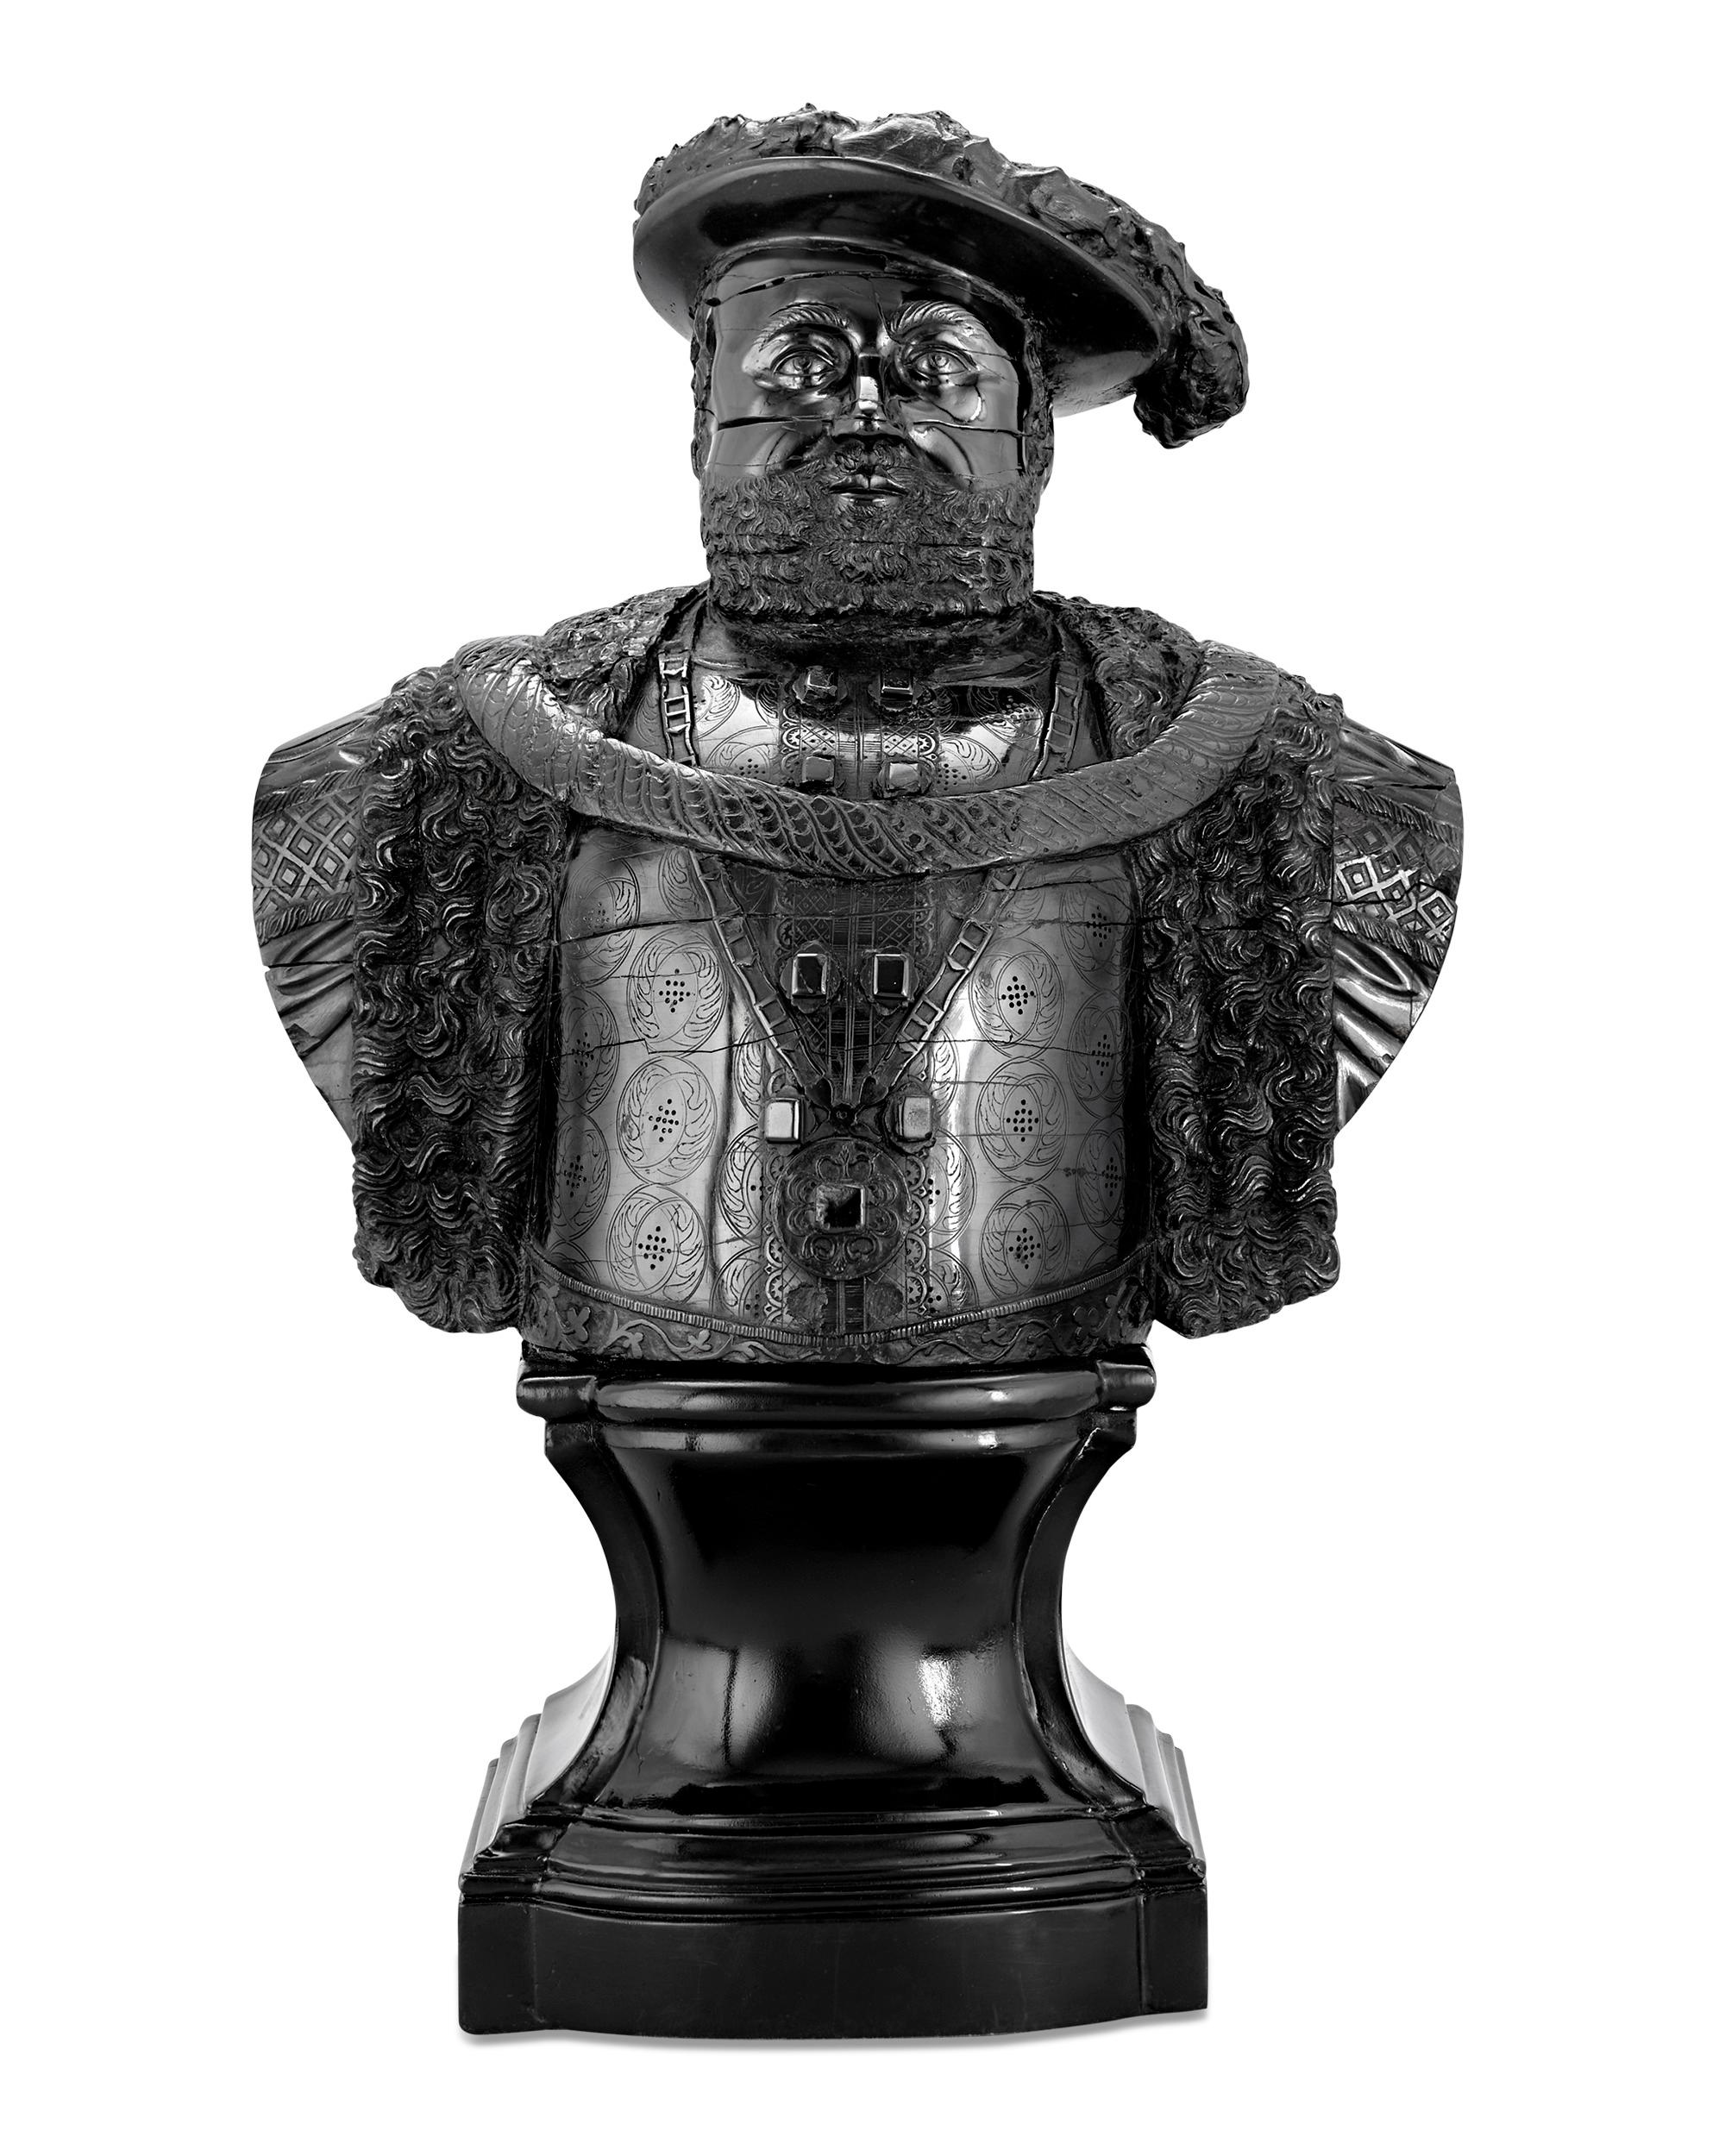 Other Cannel Coal Busts of Henry VIII and Mary, Queen of Scots